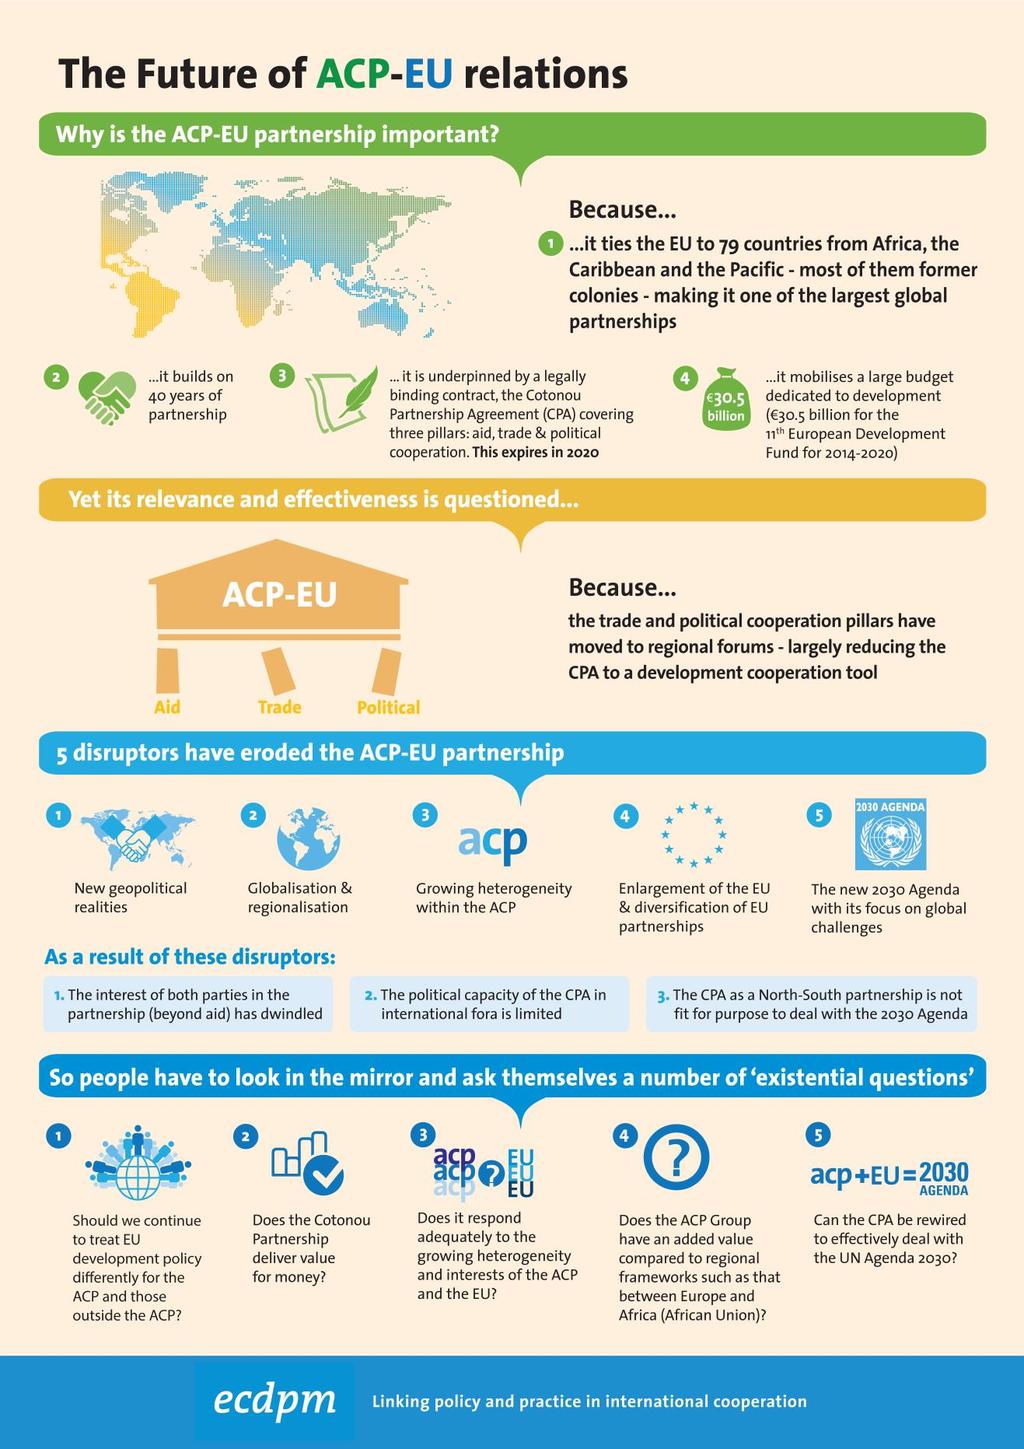 This page outlines major (global) contextual changes that affect ACP-EU relations and